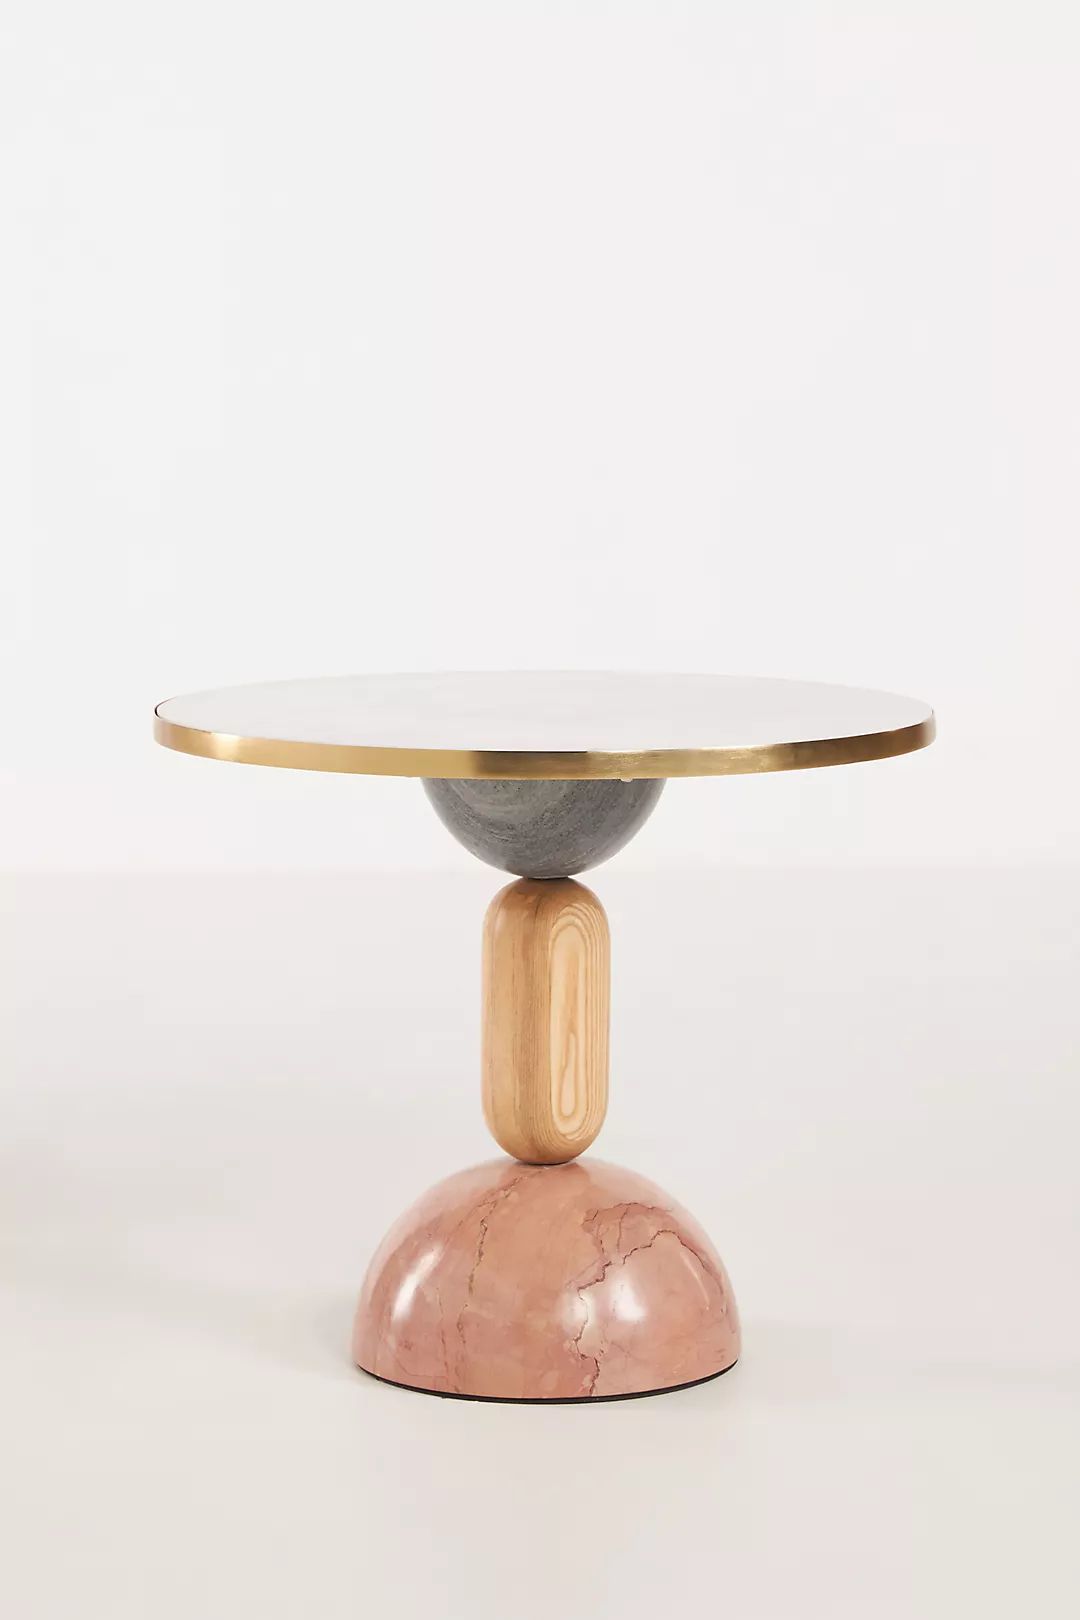 Erin Fetherston Dulcette Side Table | Anthropologie (US)